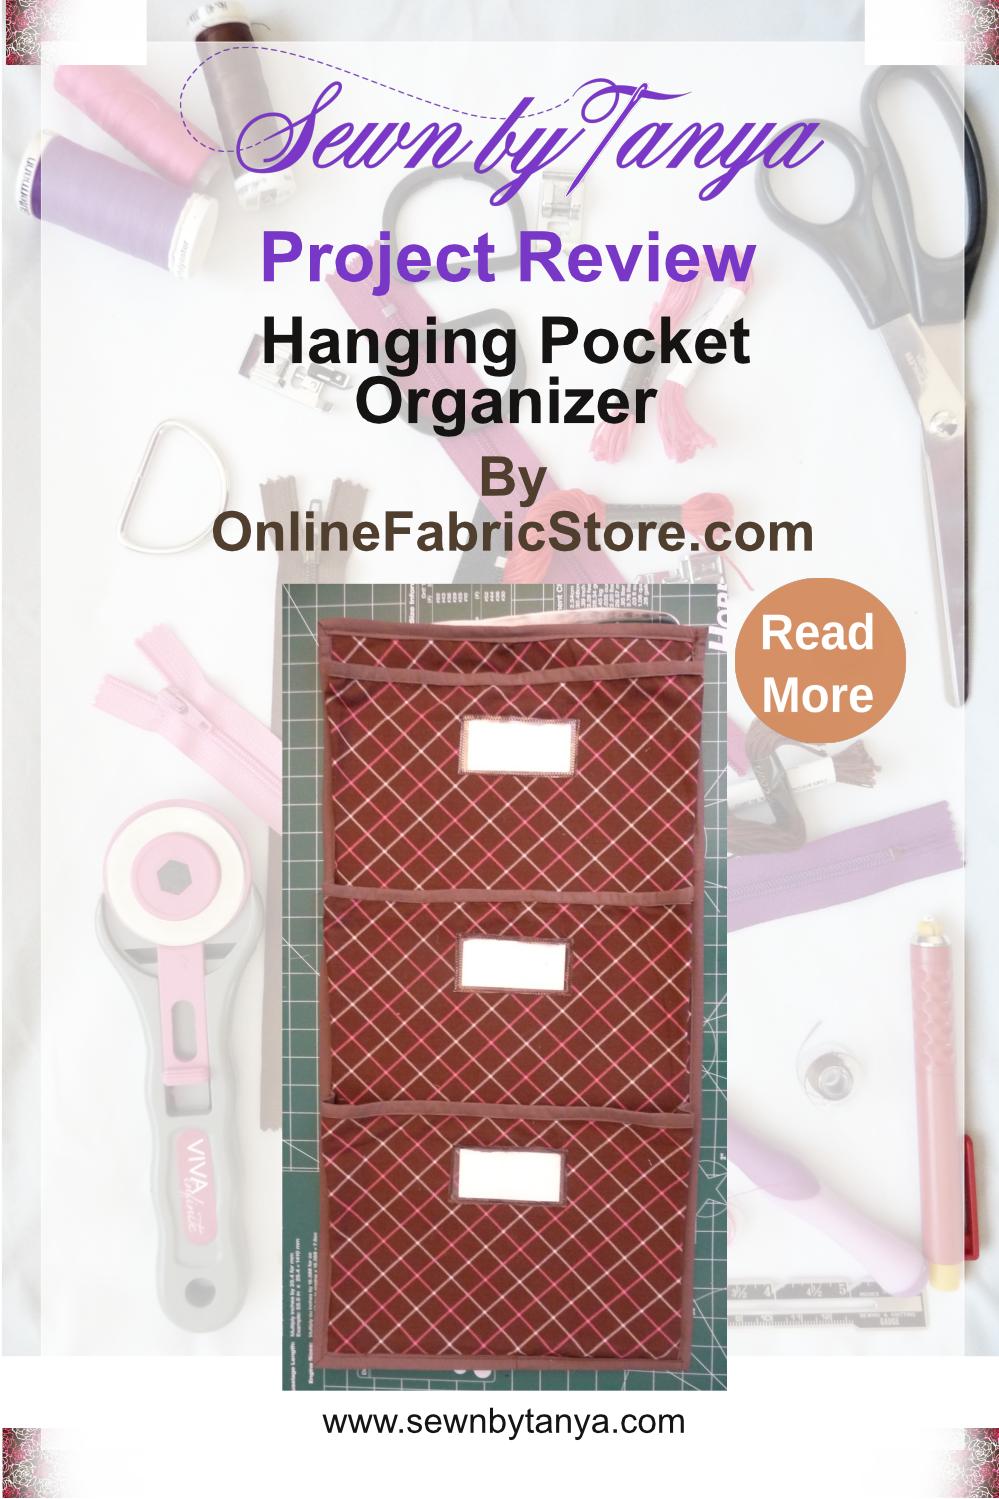 Pinterest image for "Sewn By Tanya Project Review | Hanging Pocket Organizer" showing brown Hanging Pocket Organizer on a green background